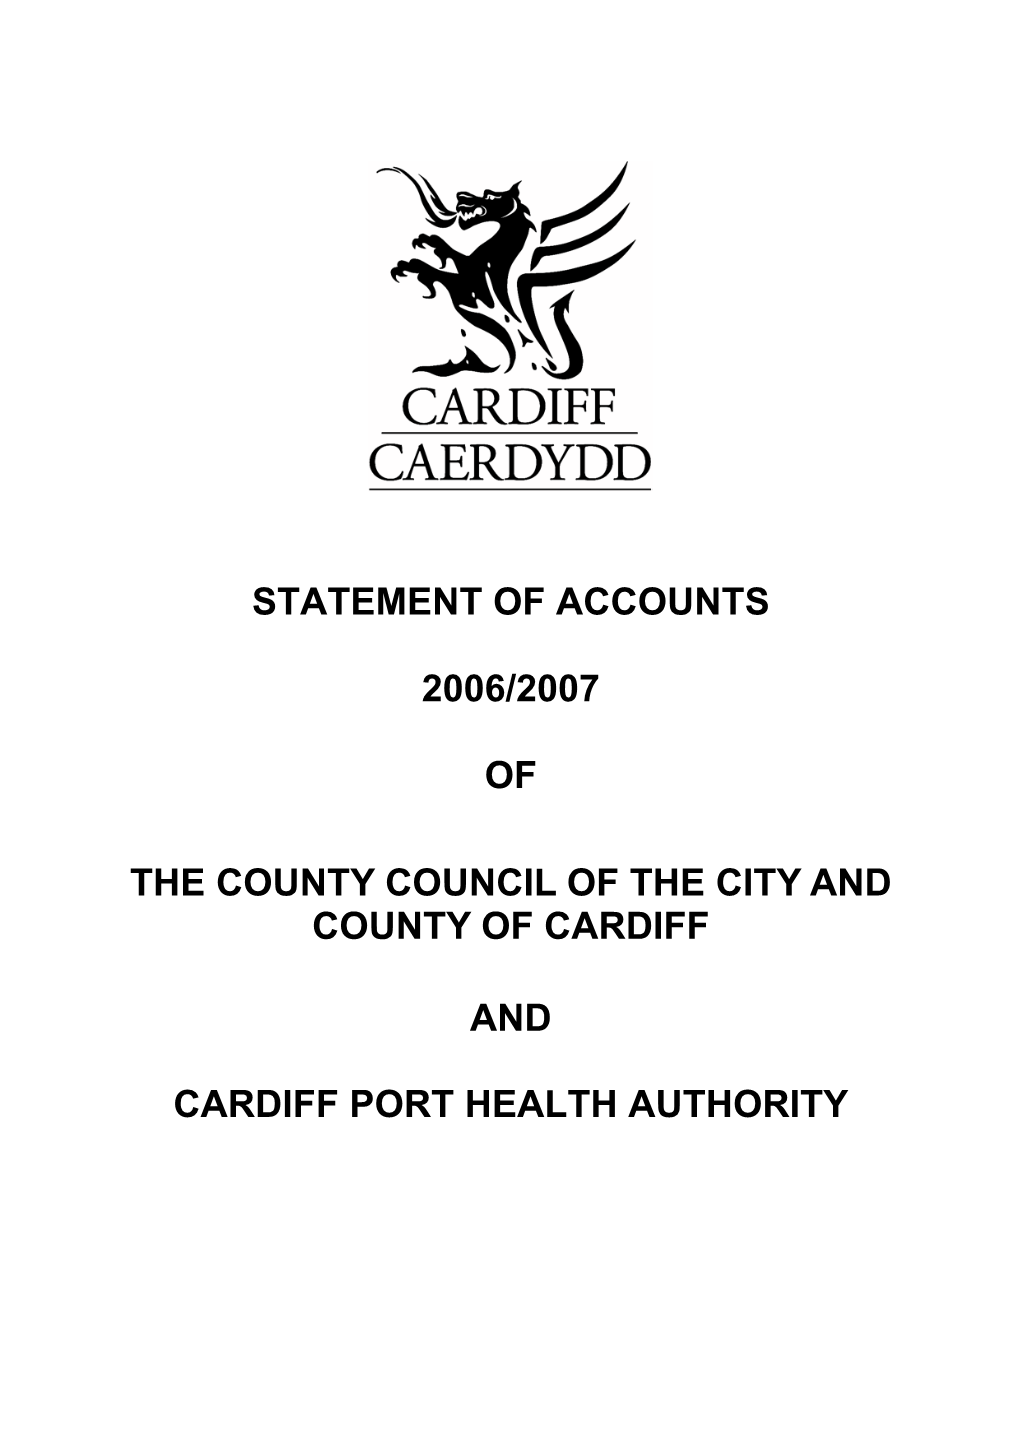 Statement of Accounts 2006/2007 Of